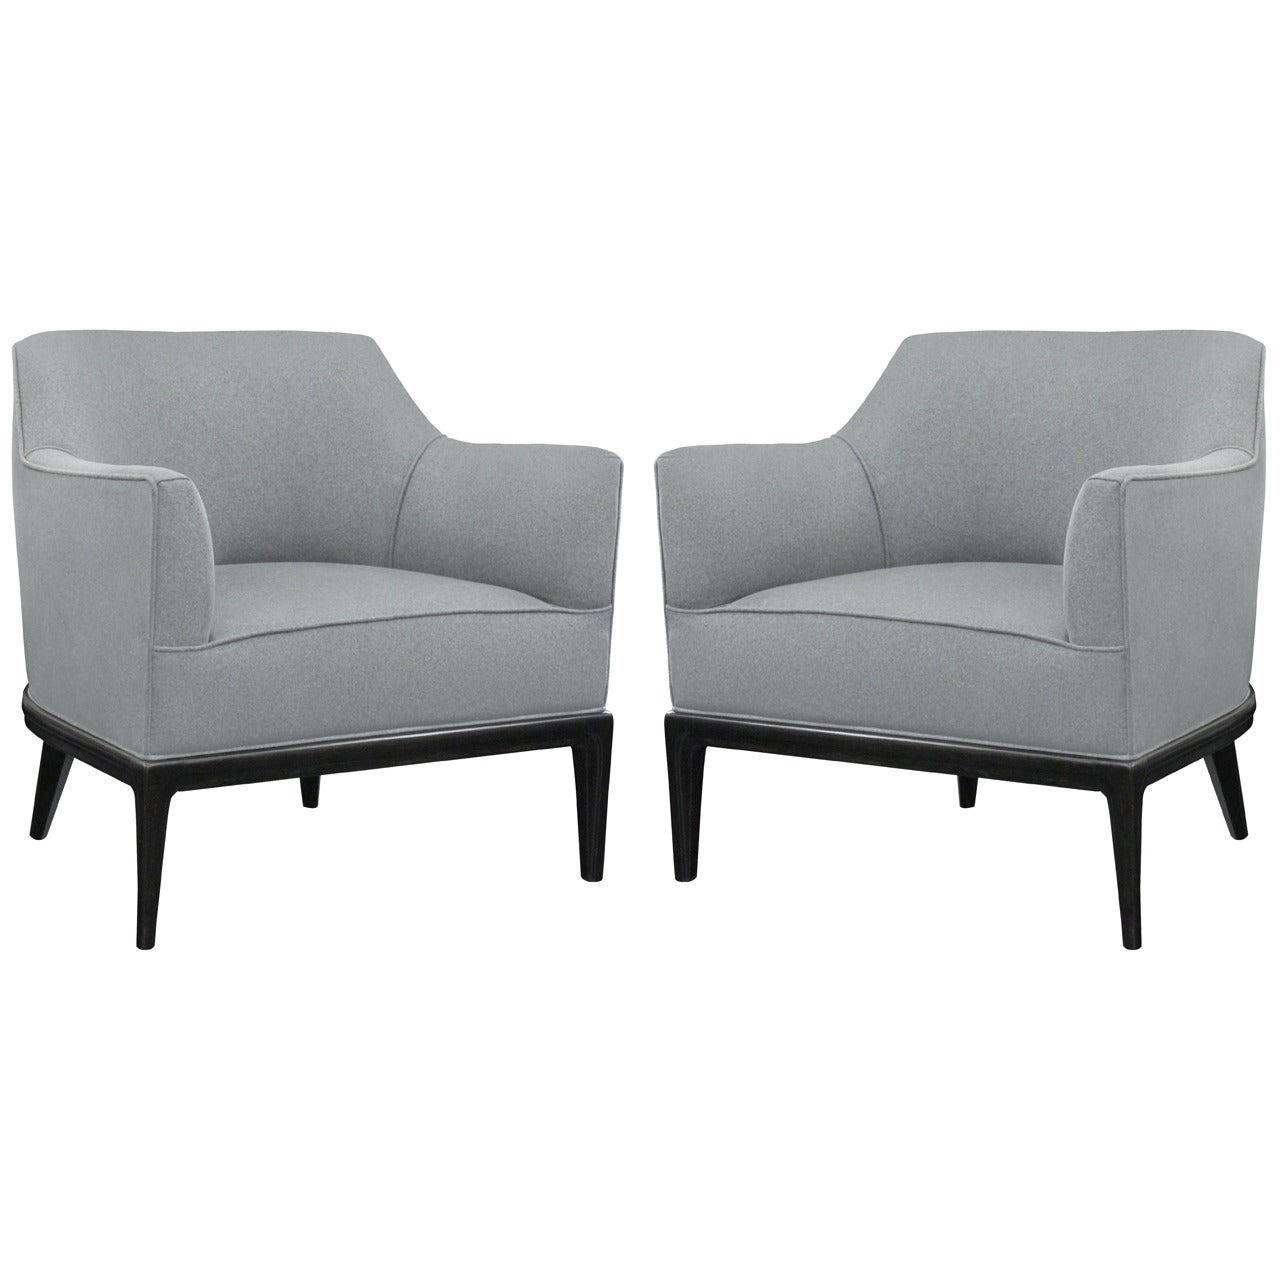 Pair of Chic Lounge Chairs with Ebonized Bases